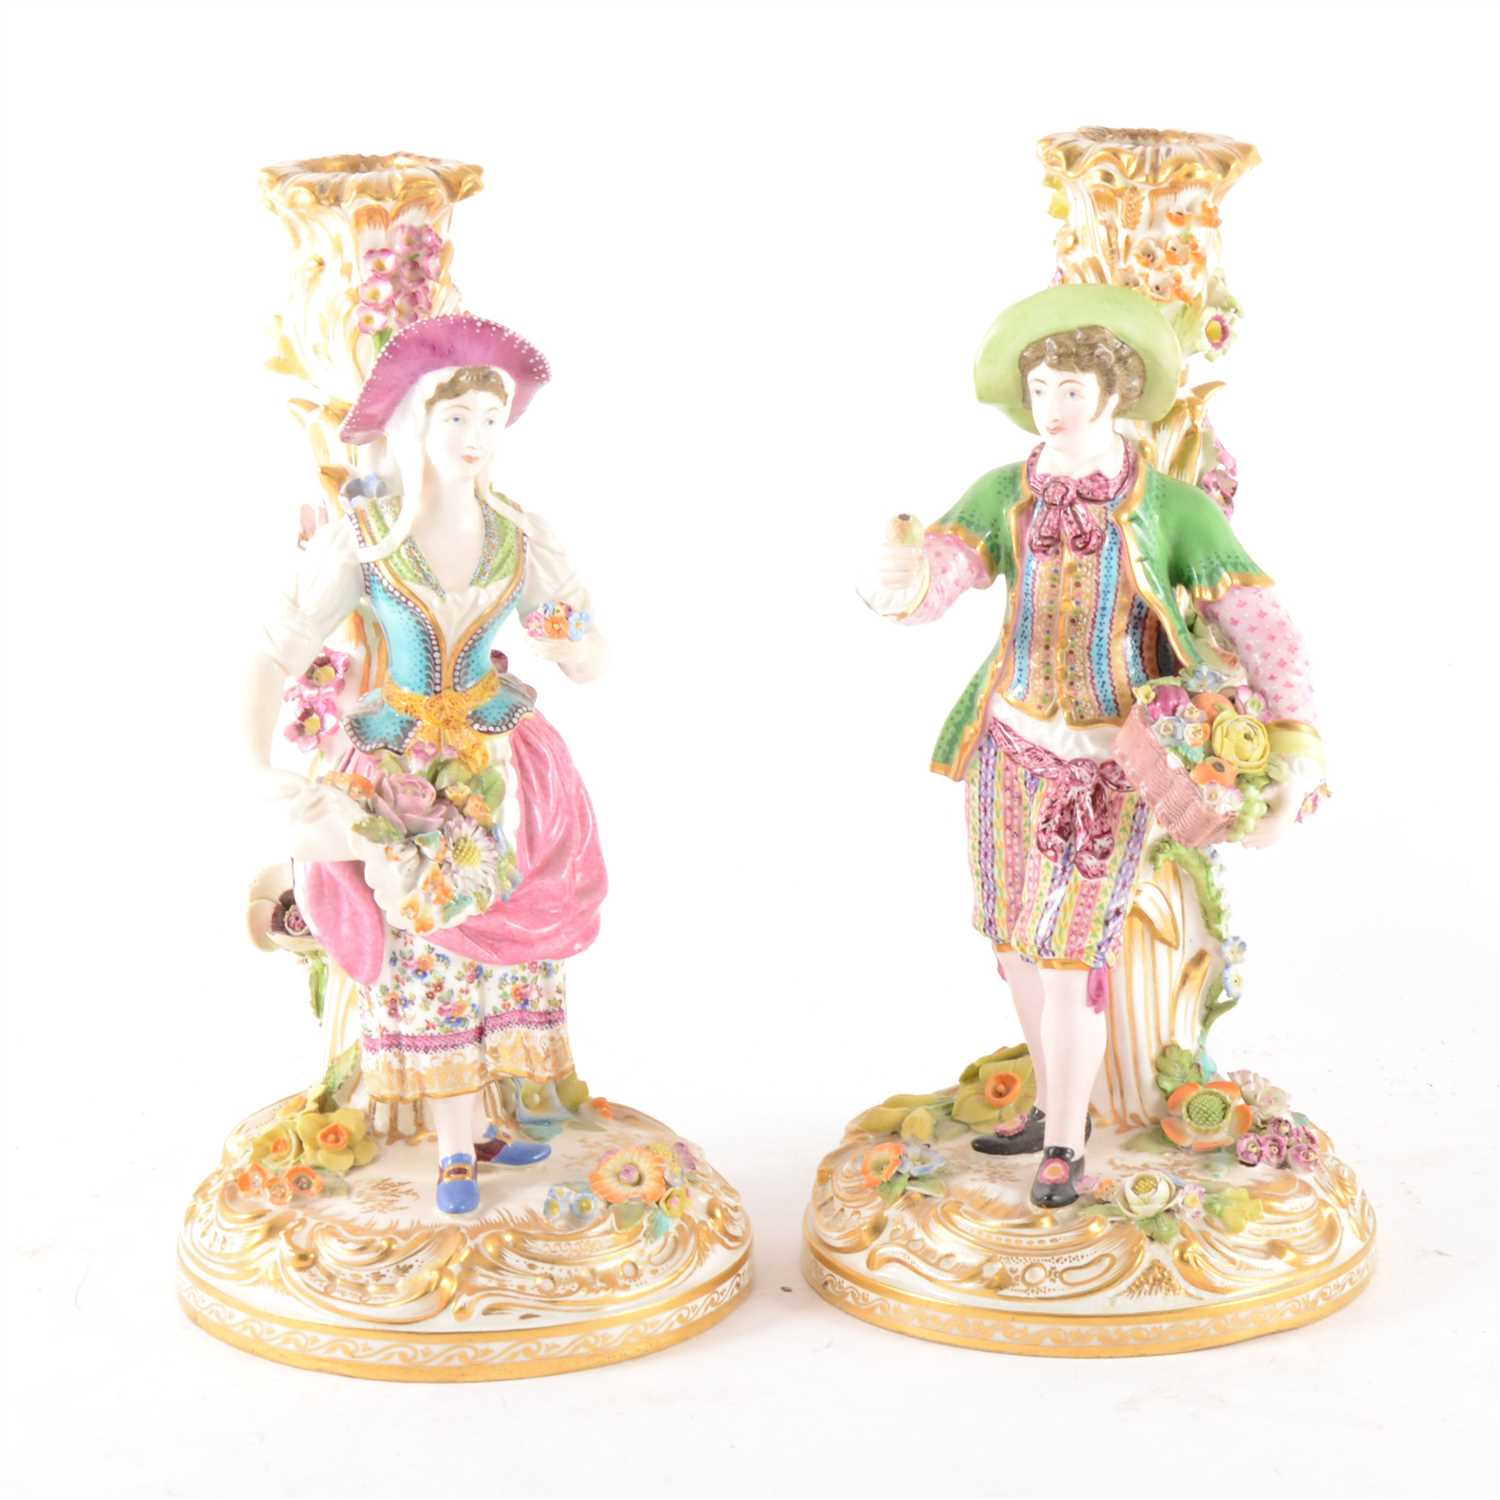 Lot 14 - A pair of English porcelain candlesticks, in the style of Stevenson & Hancock